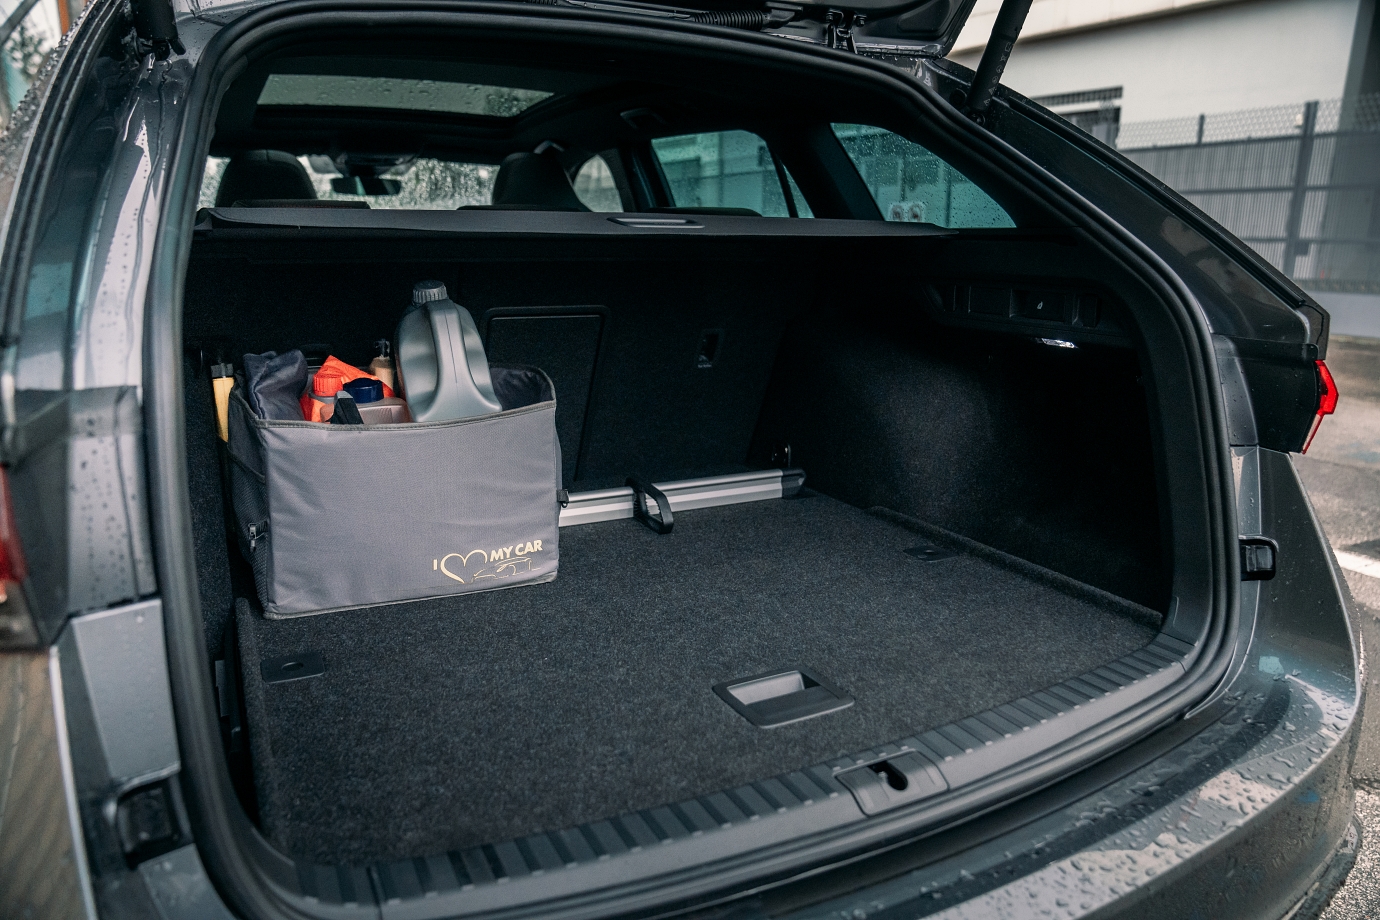 640-litres with the rear seats up